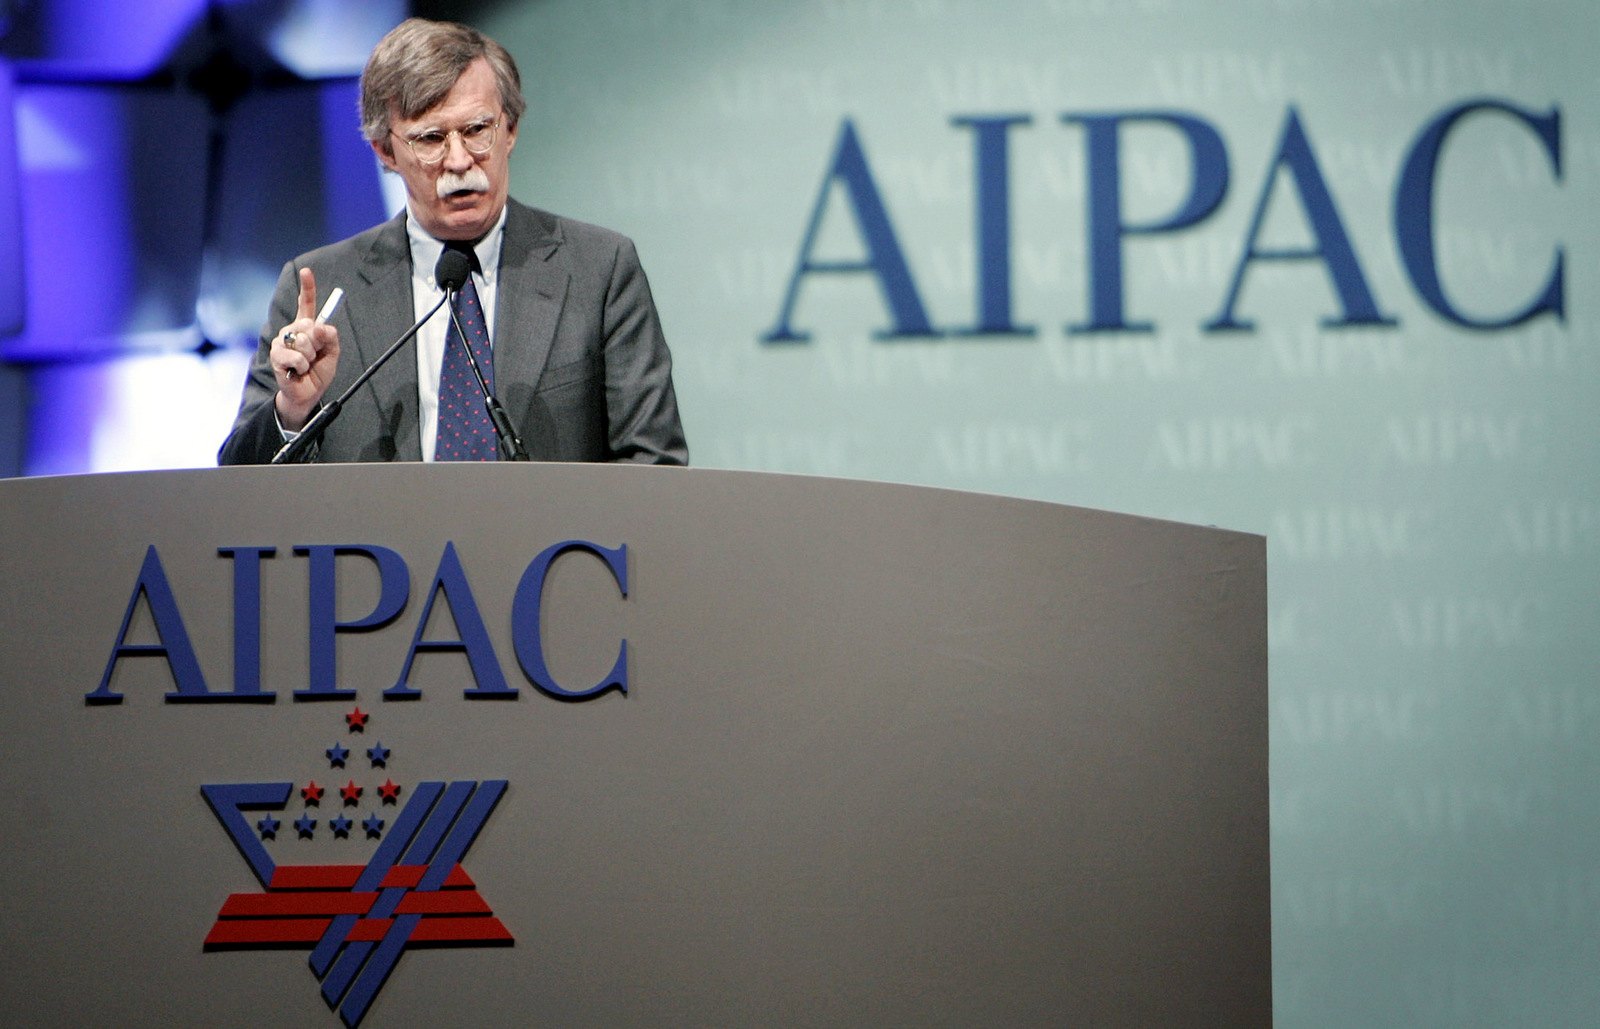 John Bolton speaks at the 2006 American Israel Public Affairs Committee's (AIPAC) Policy Conference in Washington. (AP/Caleb Jones)